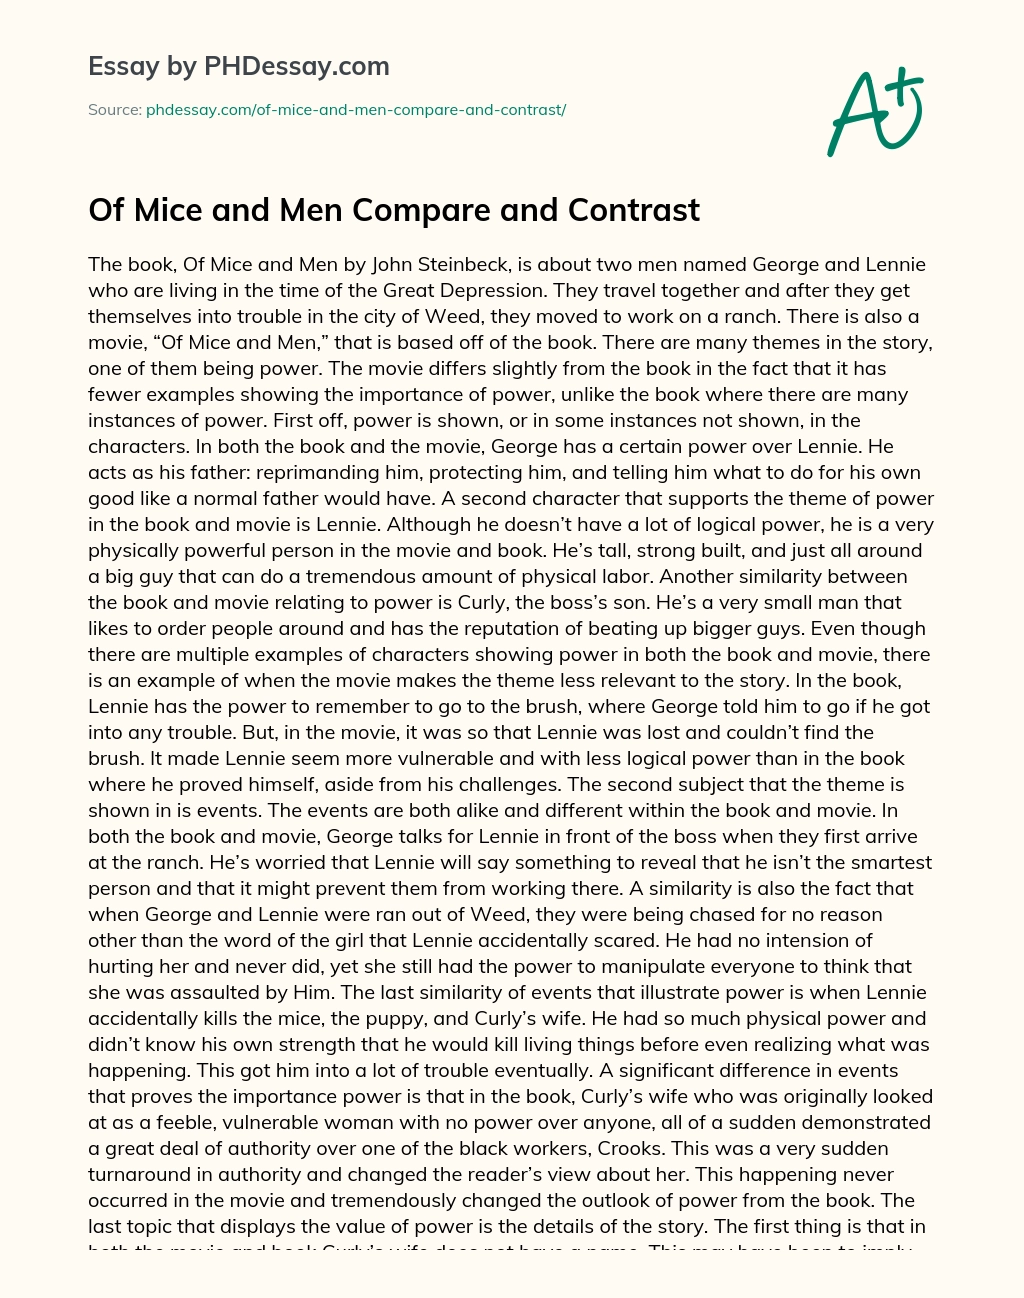 Of Mice and Men Compare and Contrast essay